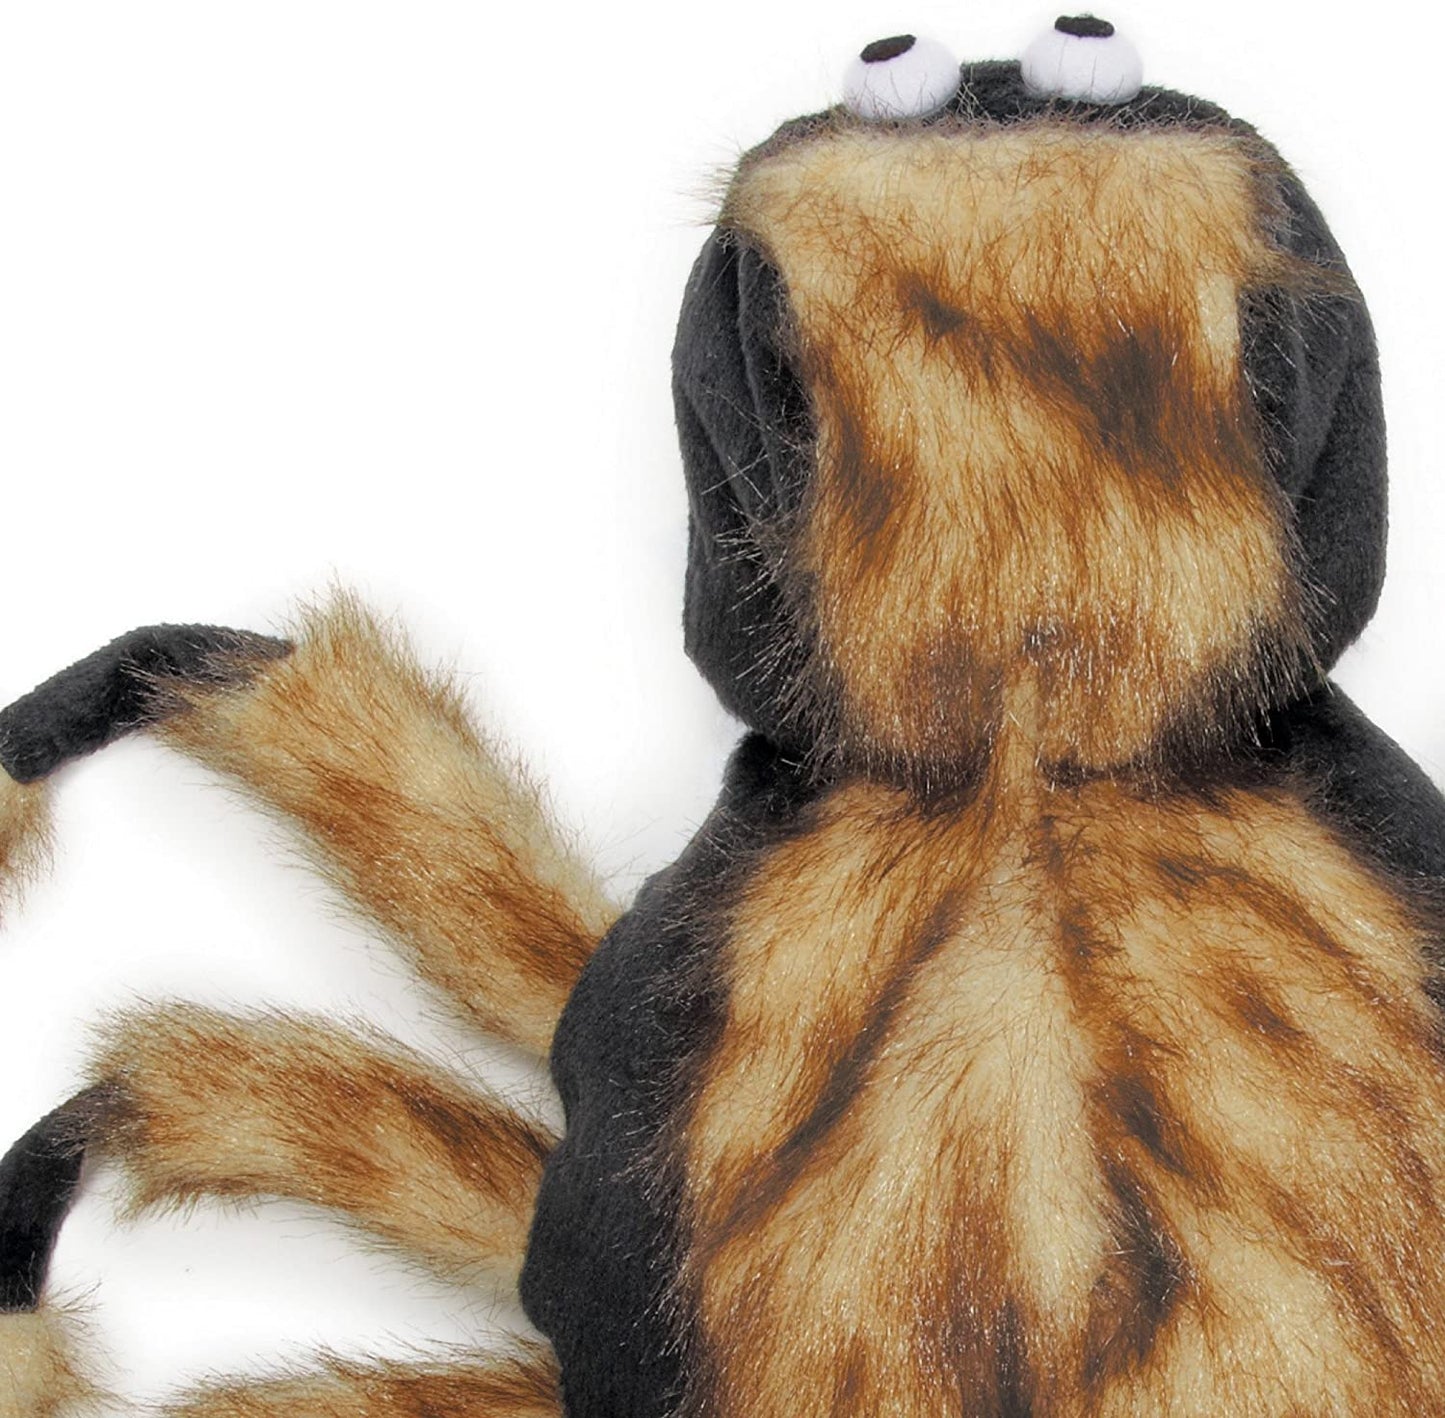 Zack & Zoey Fuzzy Brown Tarantula Costume for Dogs, 20" Large